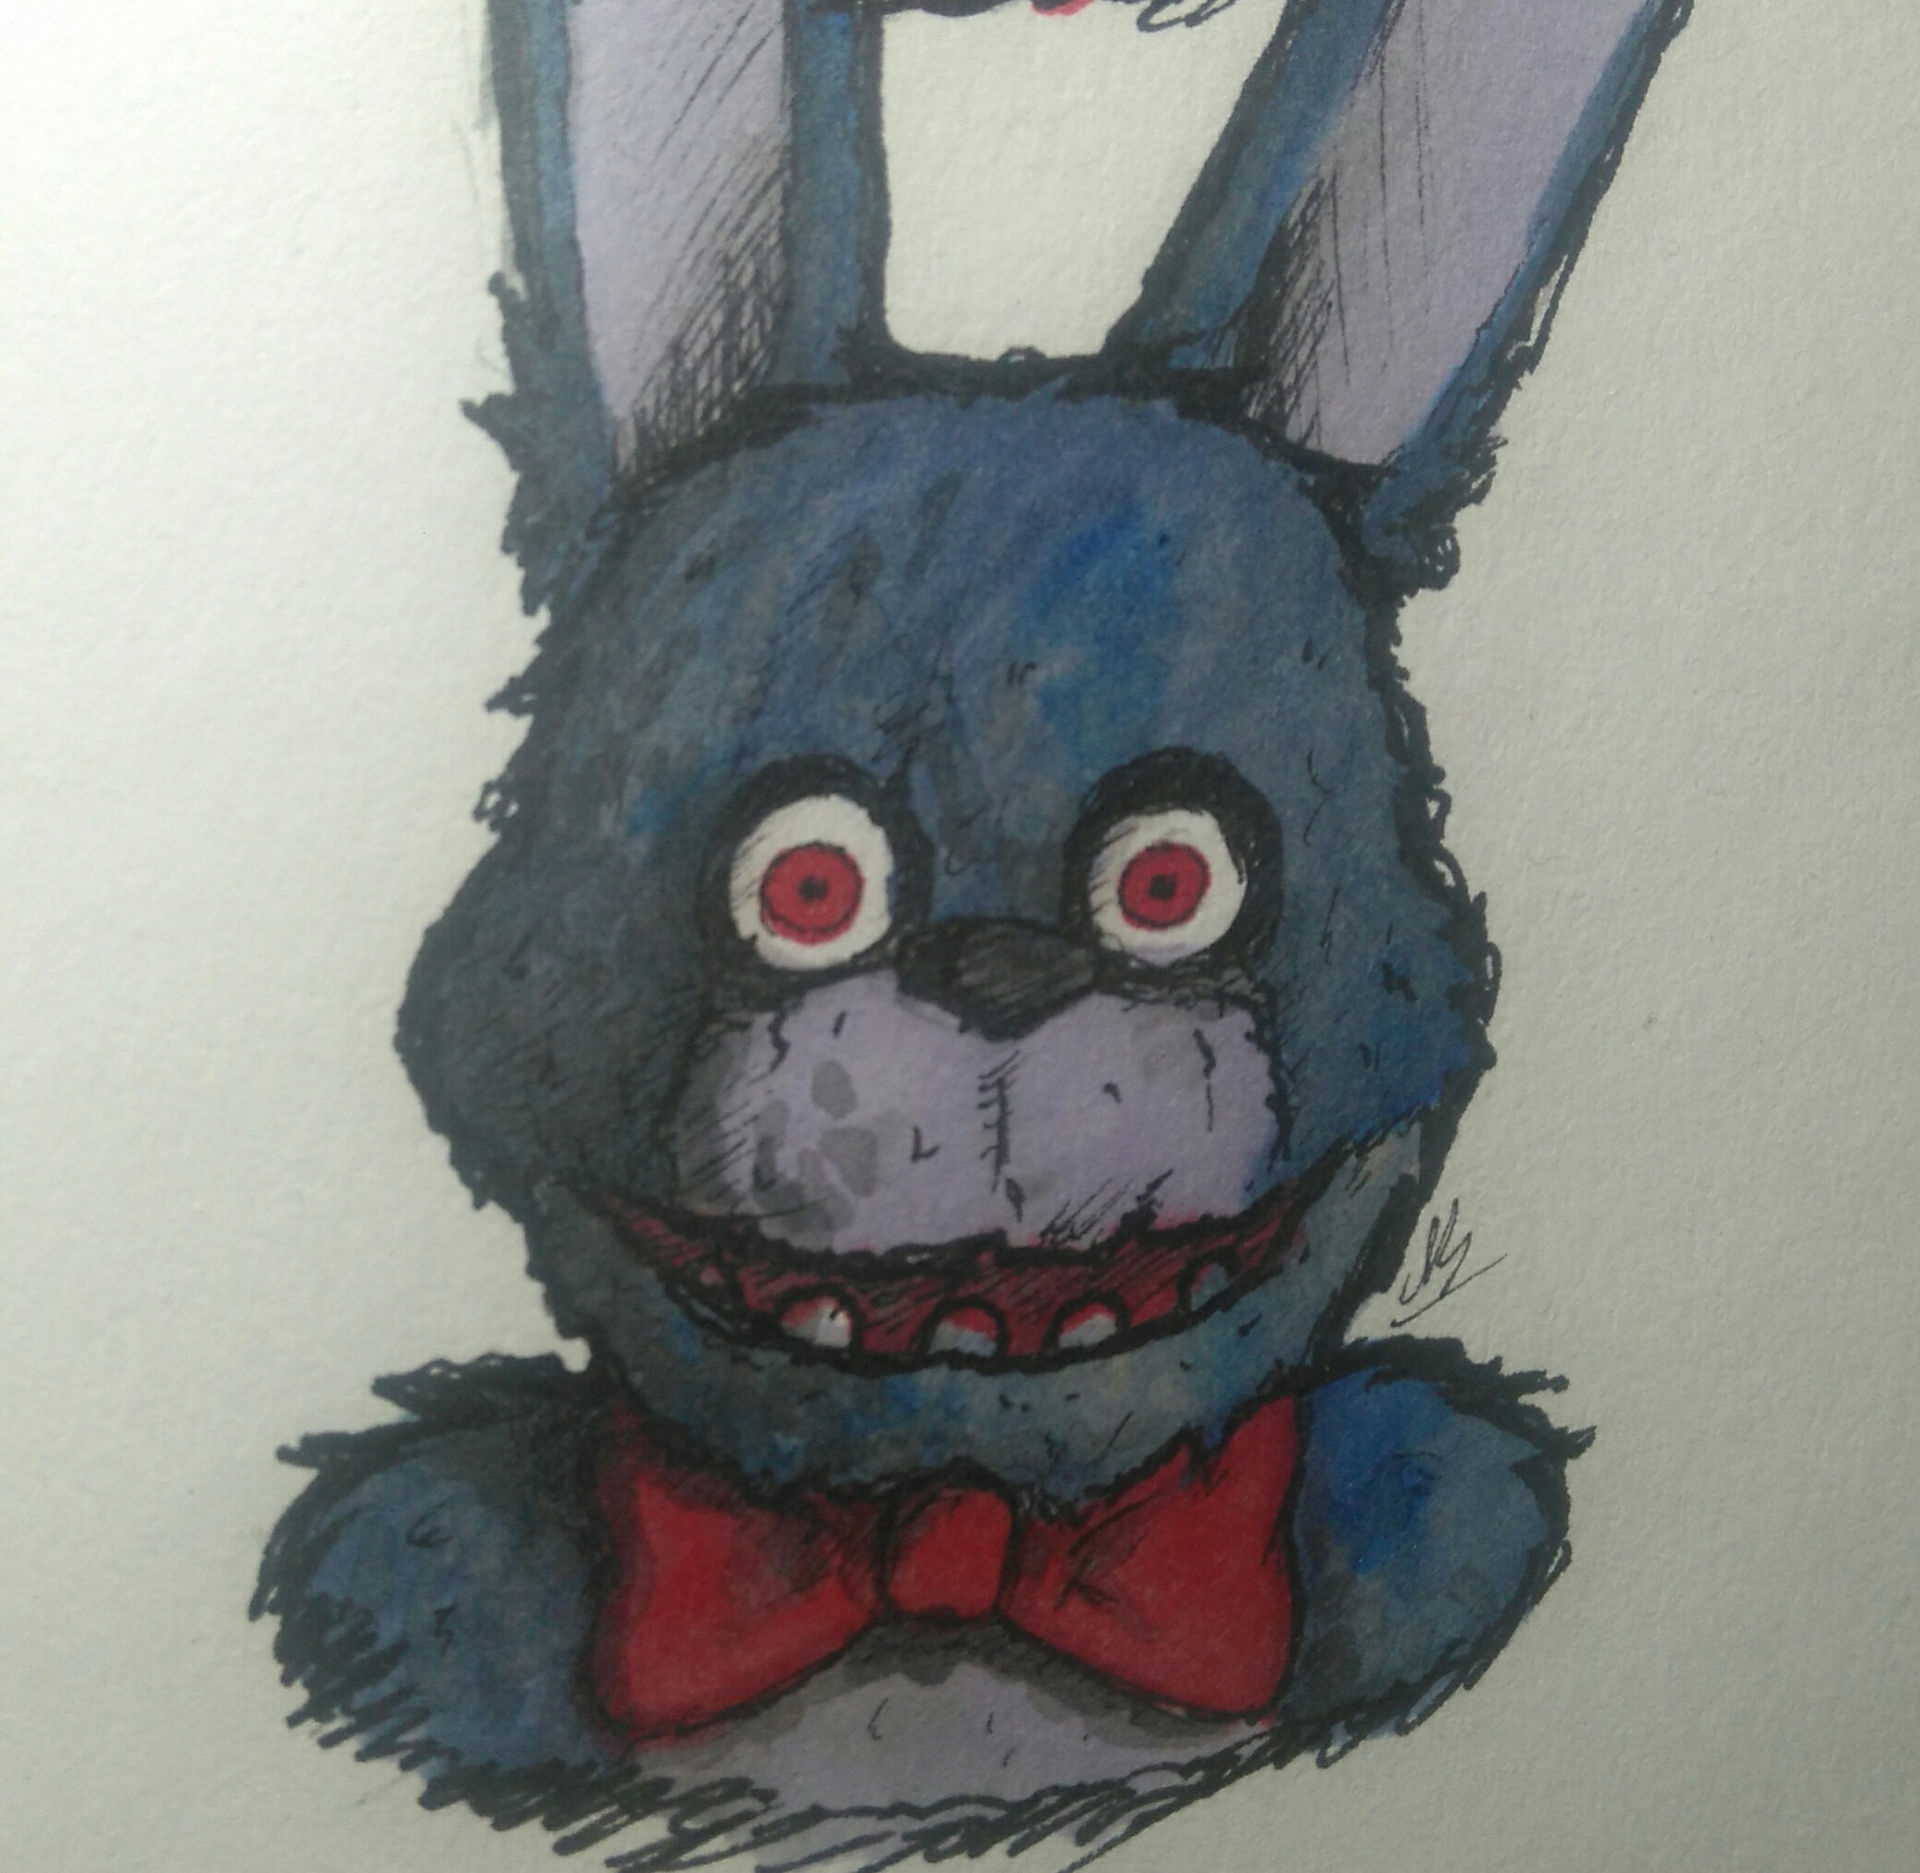 Withered Bonnie -  UK